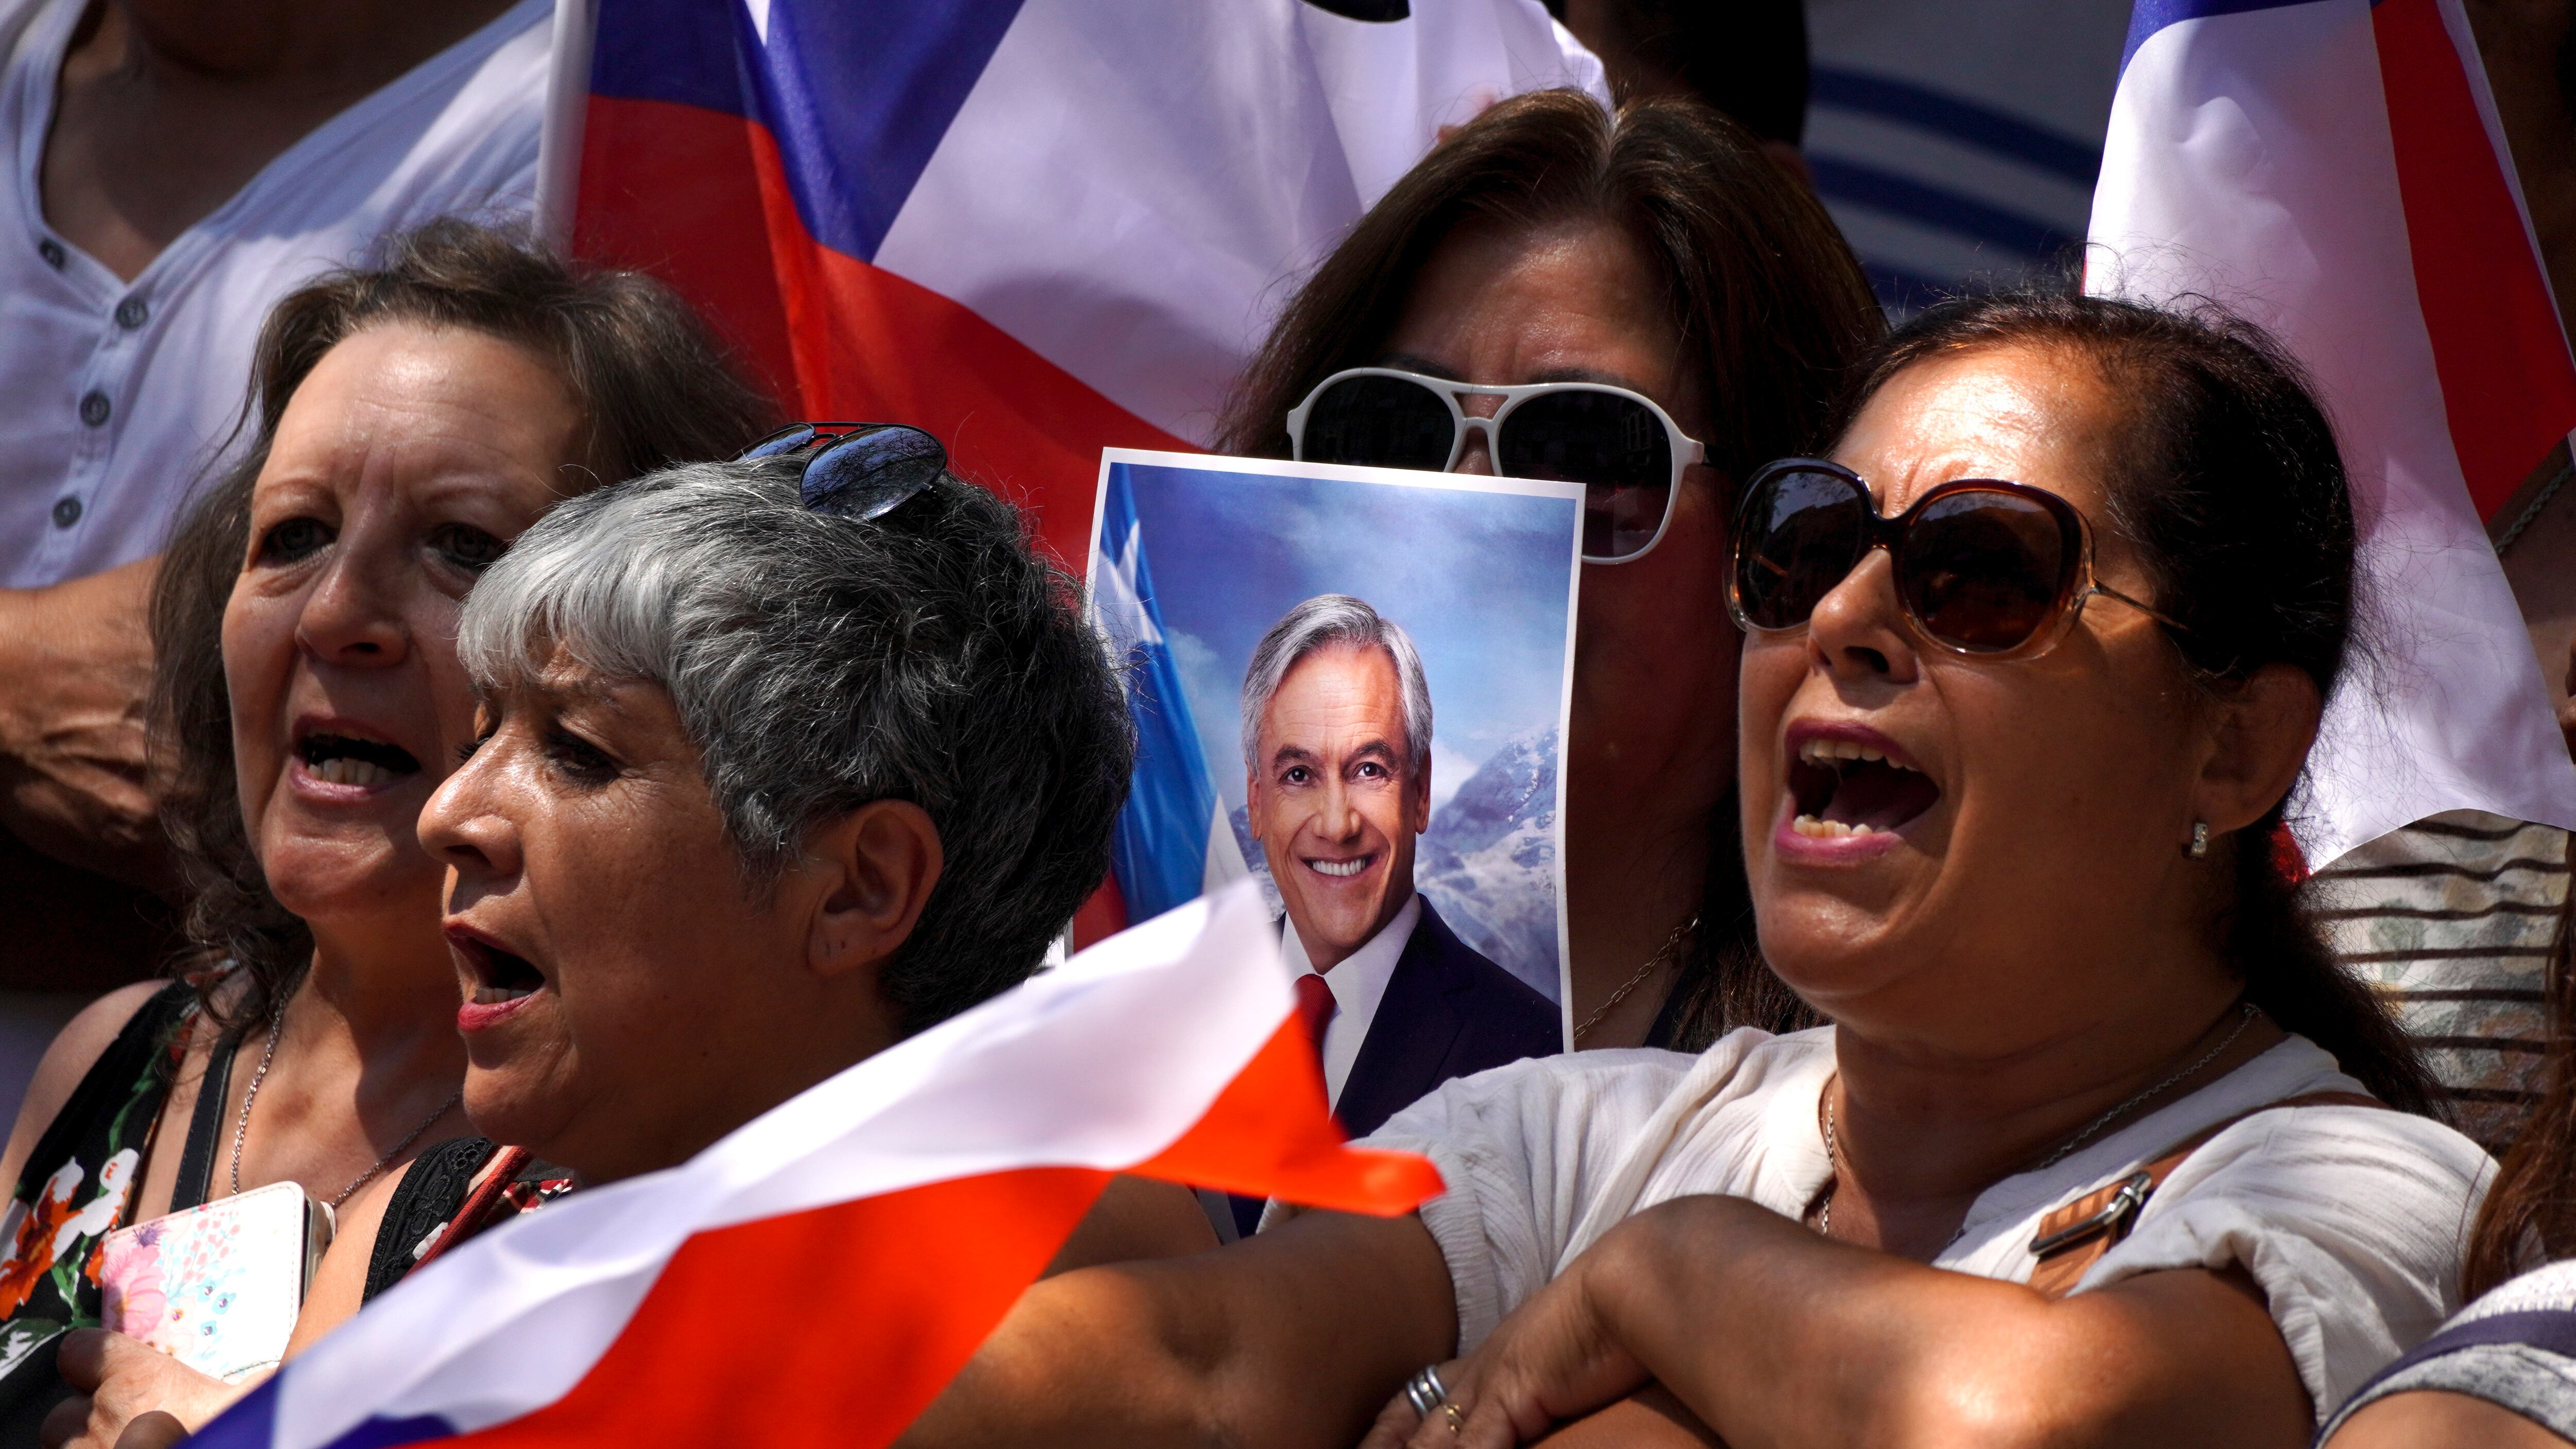 People sing Chile’s national anthem outside Congress as they wait for the arrival of the coffin of Sebastian Pinera (Matias Basualdo/AP)